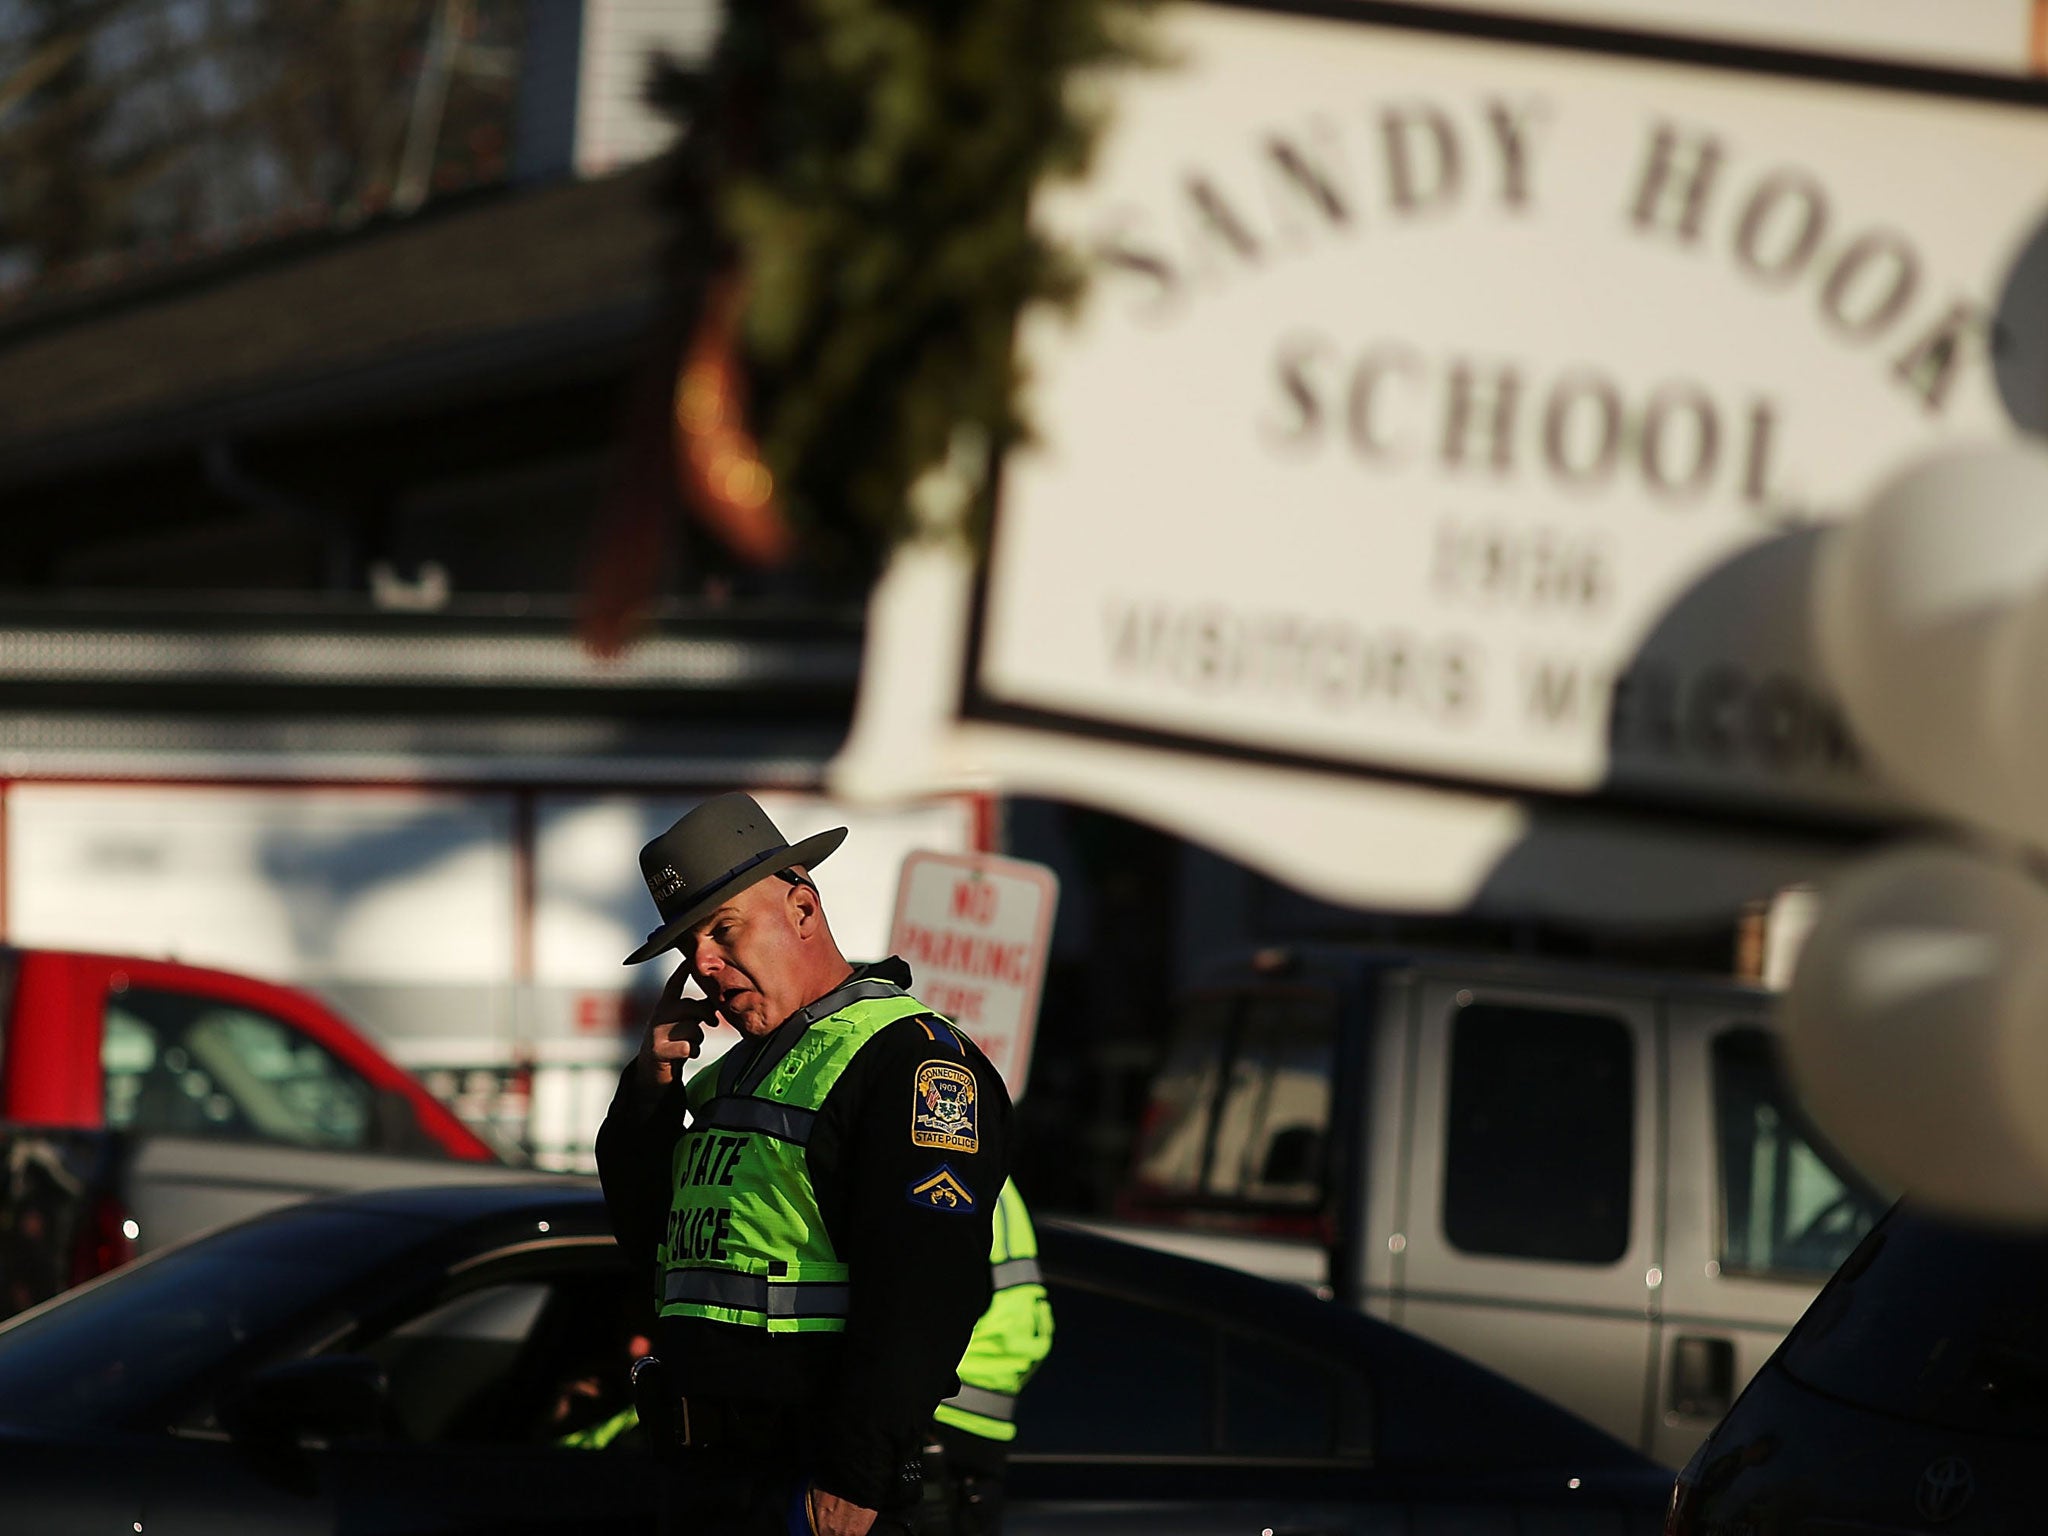 The report concludes there is no clear indication on what his motives were, or why he targeted Sandy Hook Elementary School